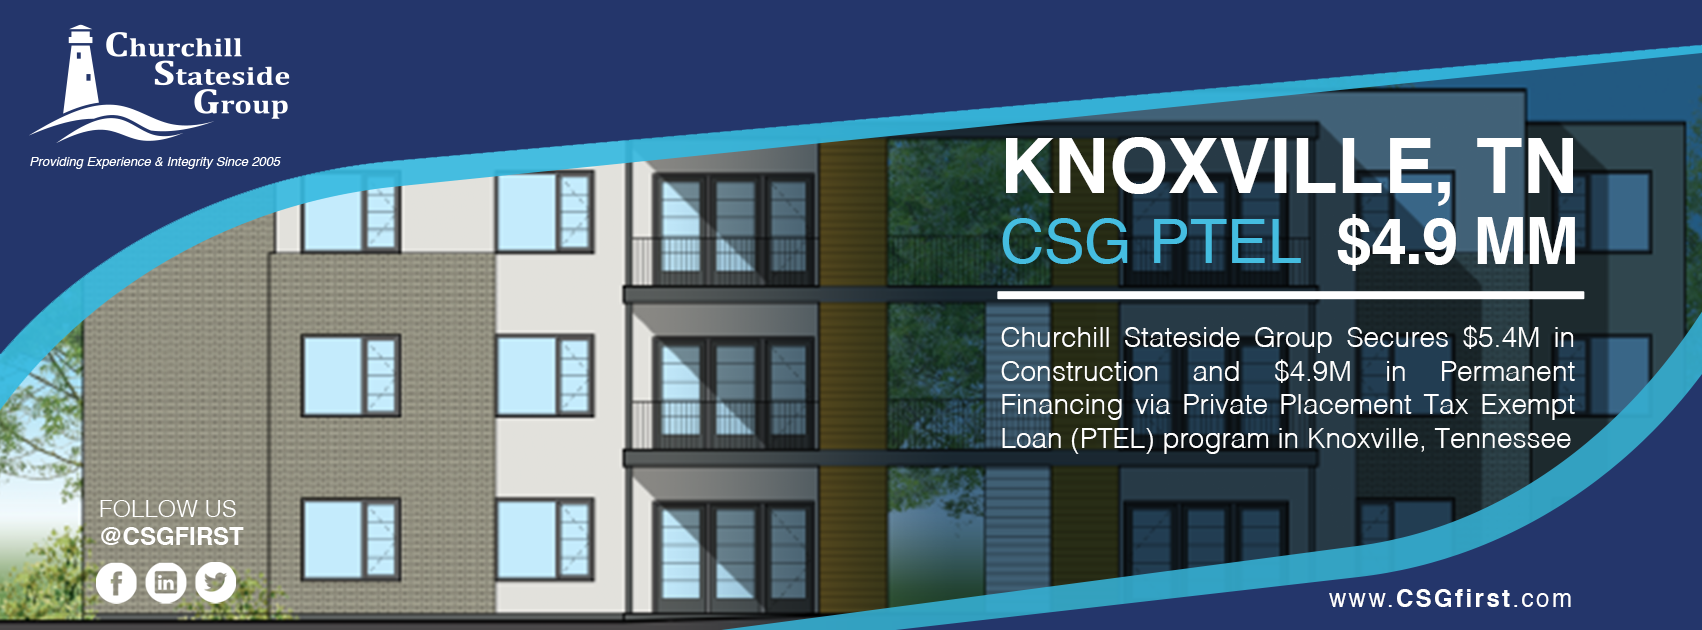 Churchill Stateside Group Secures $5.4M in Construction and $4.9M in Permanent Financing via Private Placement Tax Exempt Loan (PTEL) program in Knoxville, Tennessee